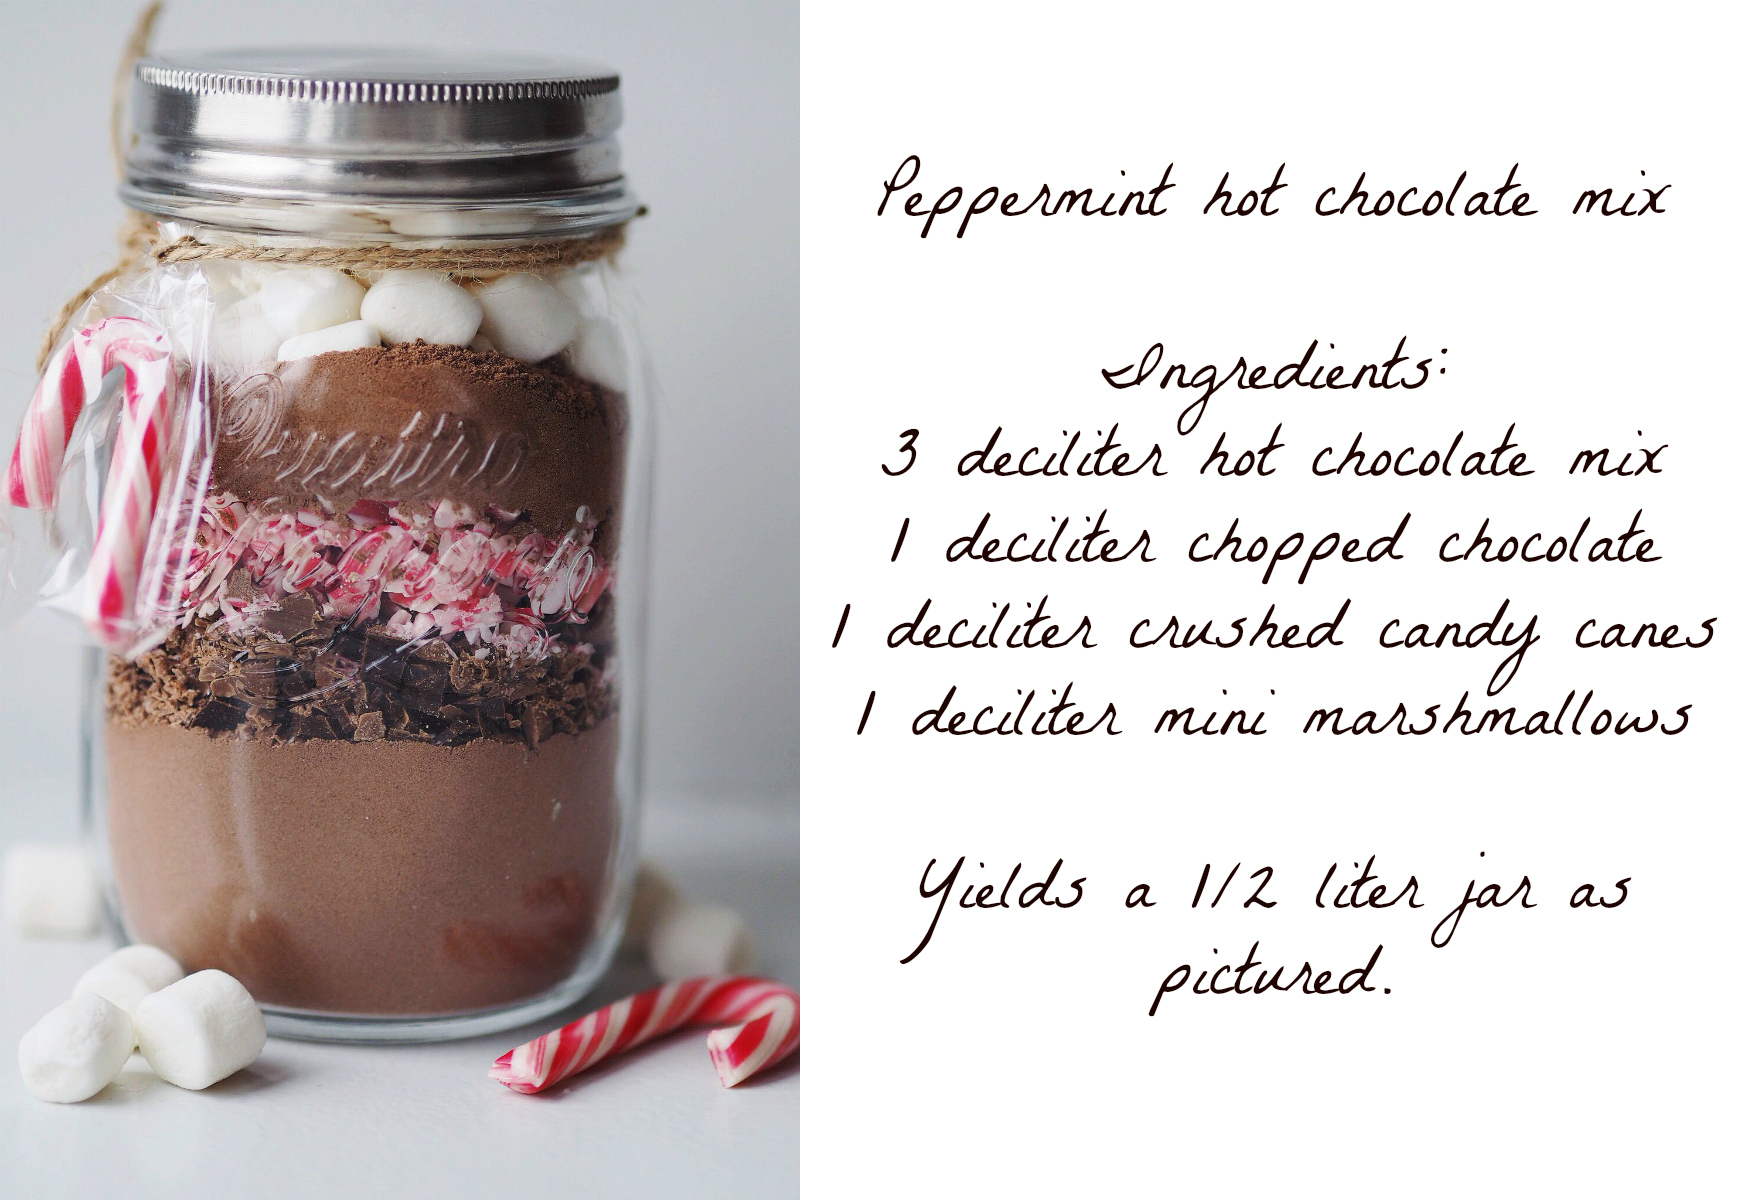 Peppermint hot chocolate mix - perfect for gifting!